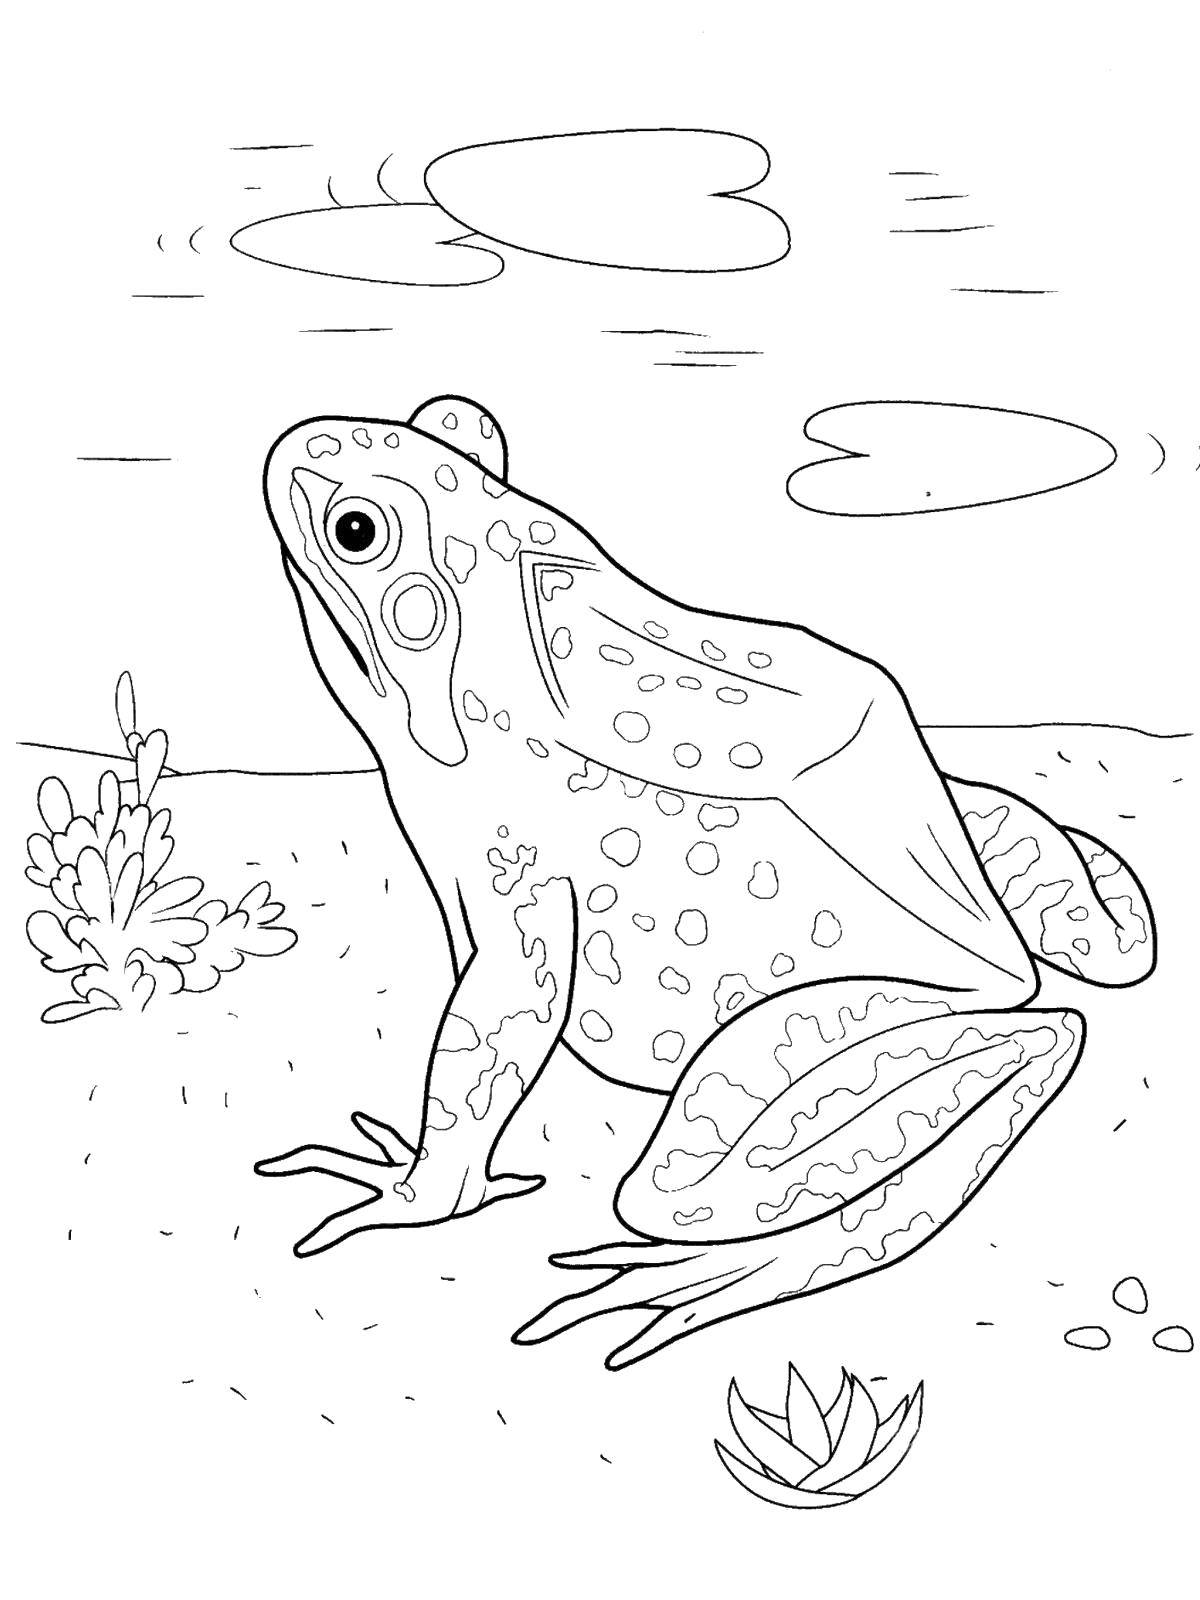 Coloring Frog. Category reptiles. Tags:  Reptile, frog.